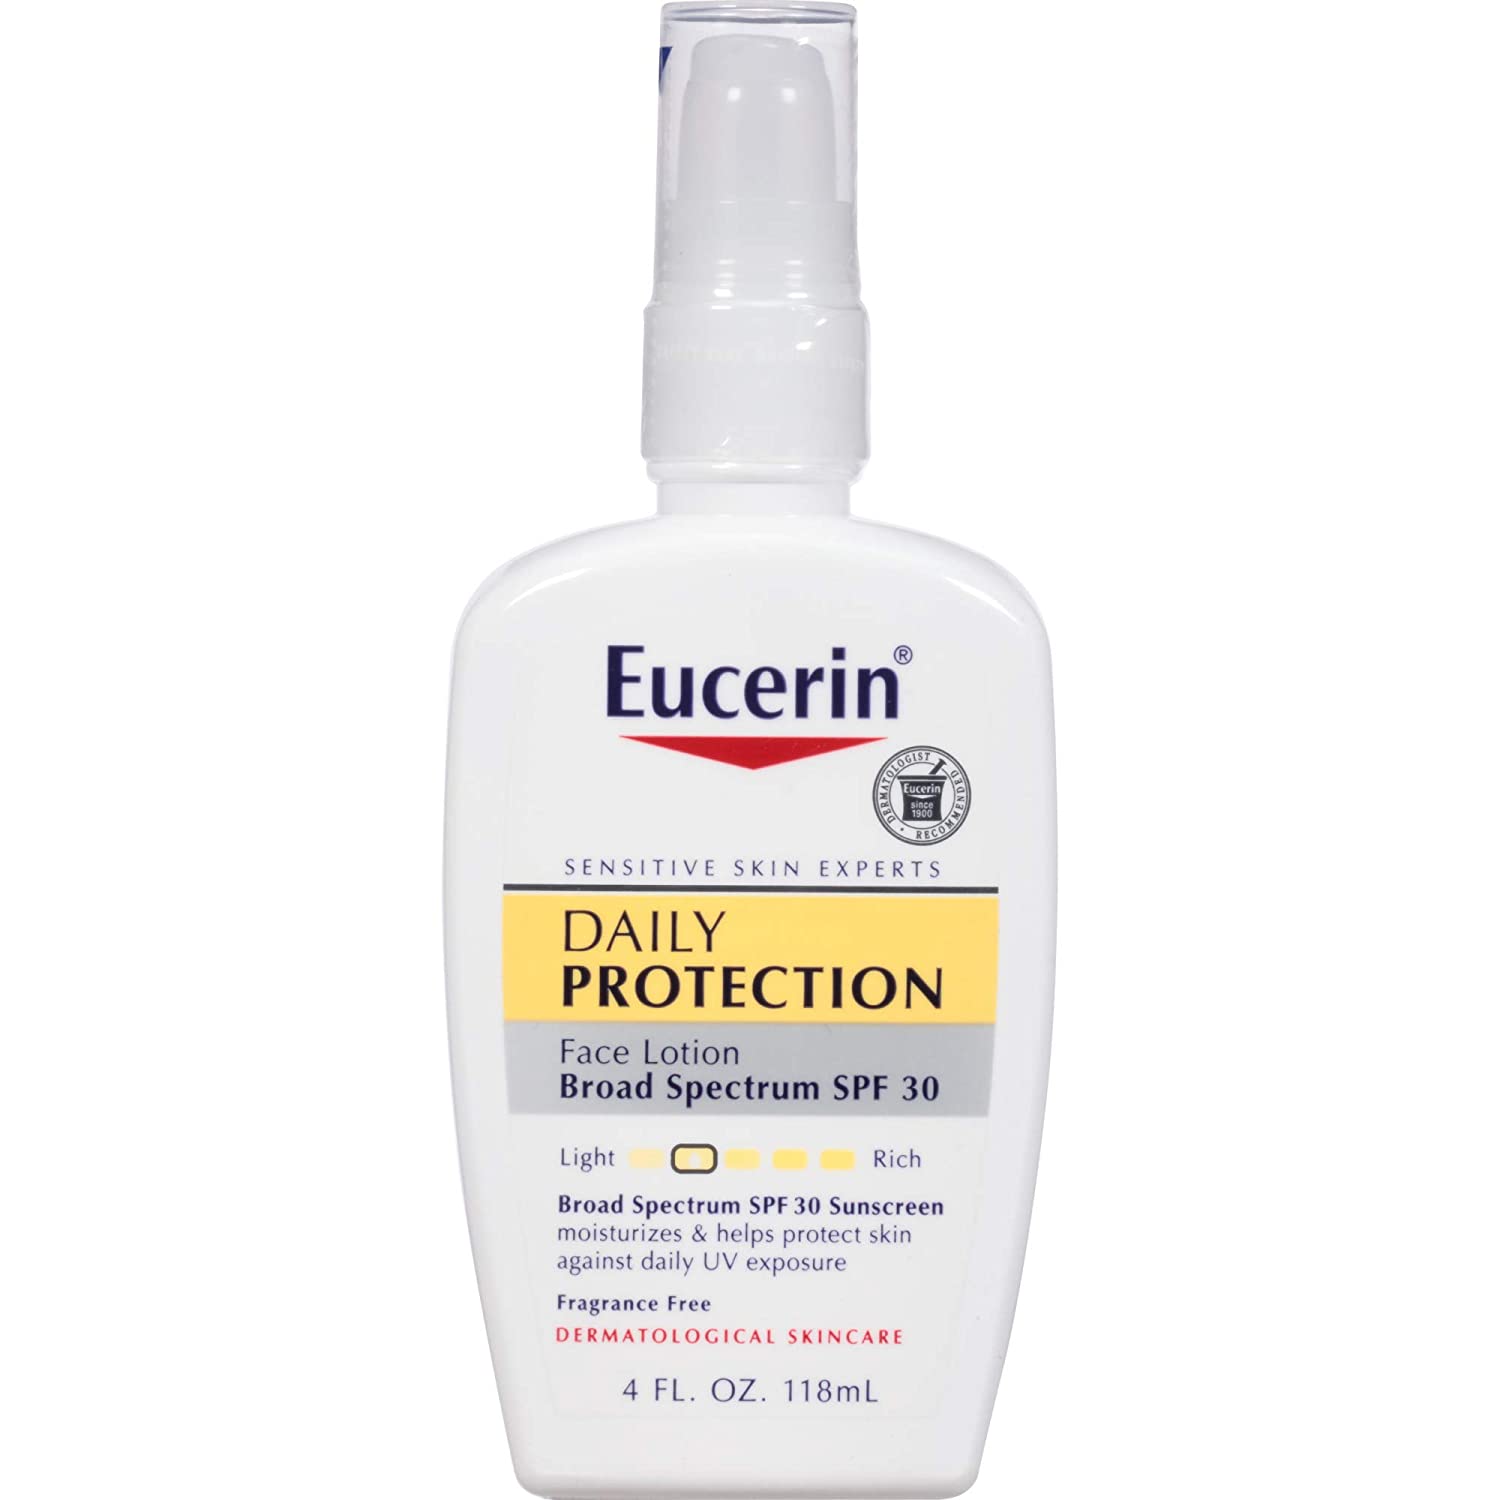 4-Oz Eucerin Daily Protection Face Lotion (Broad Spectrum SPF 30) $5.25 w/ S&S + Free Shipping w/ Prime or on $25+